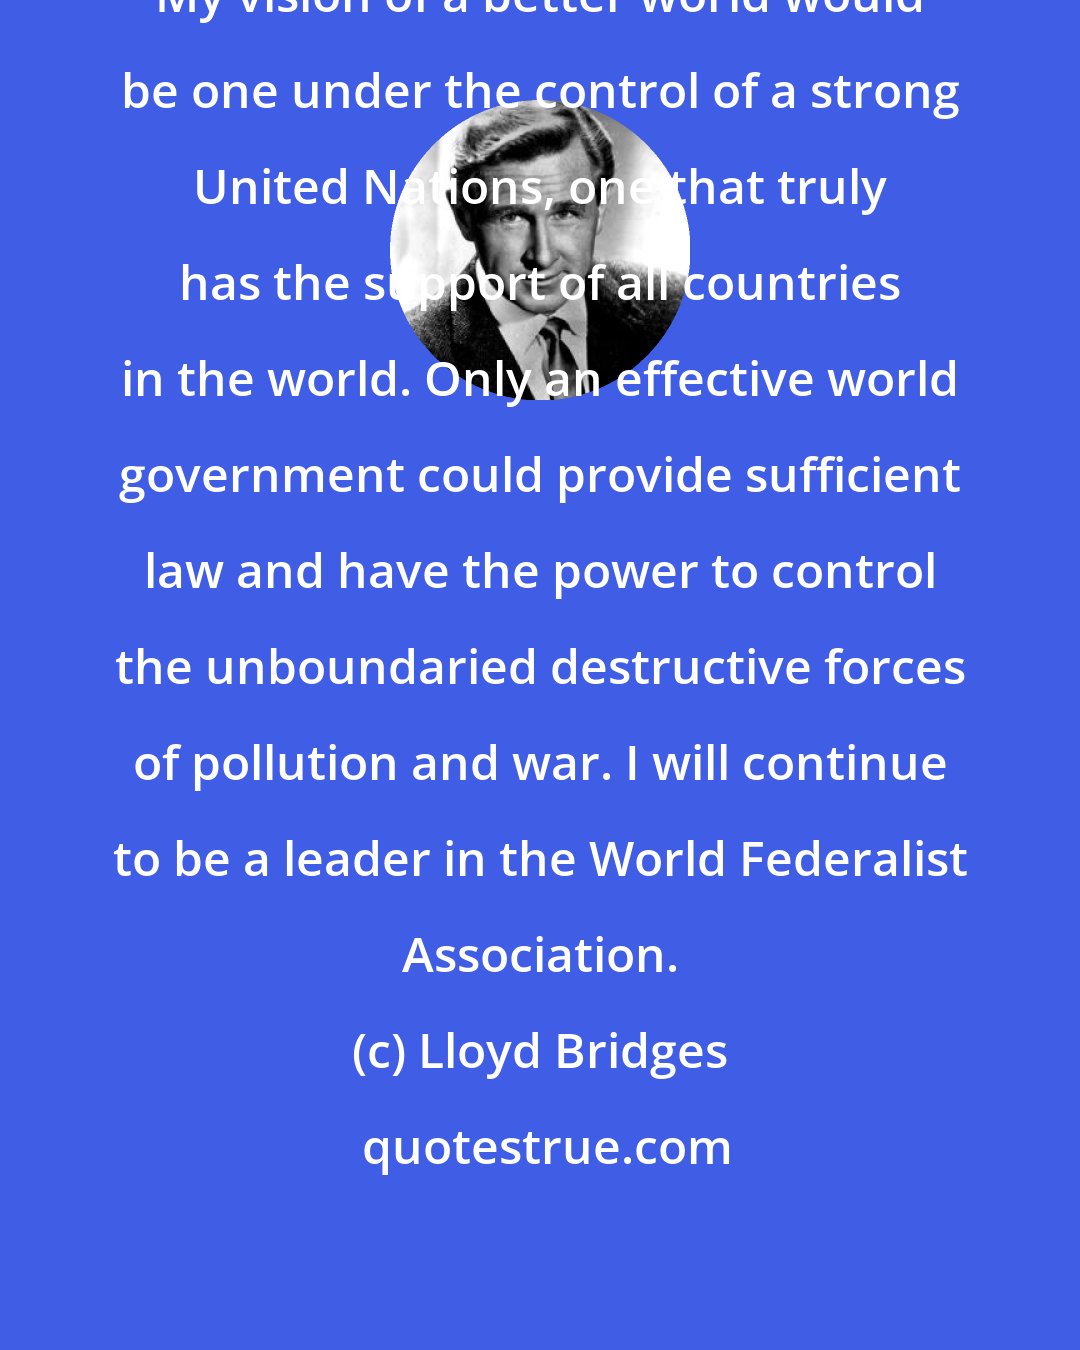 Lloyd Bridges: My vision of a better world would be one under the control of a strong United Nations, one that truly has the support of all countries in the world. Only an effective world government could provide sufficient law and have the power to control the unboundaried destructive forces of pollution and war. I will continue to be a leader in the World Federalist Association.